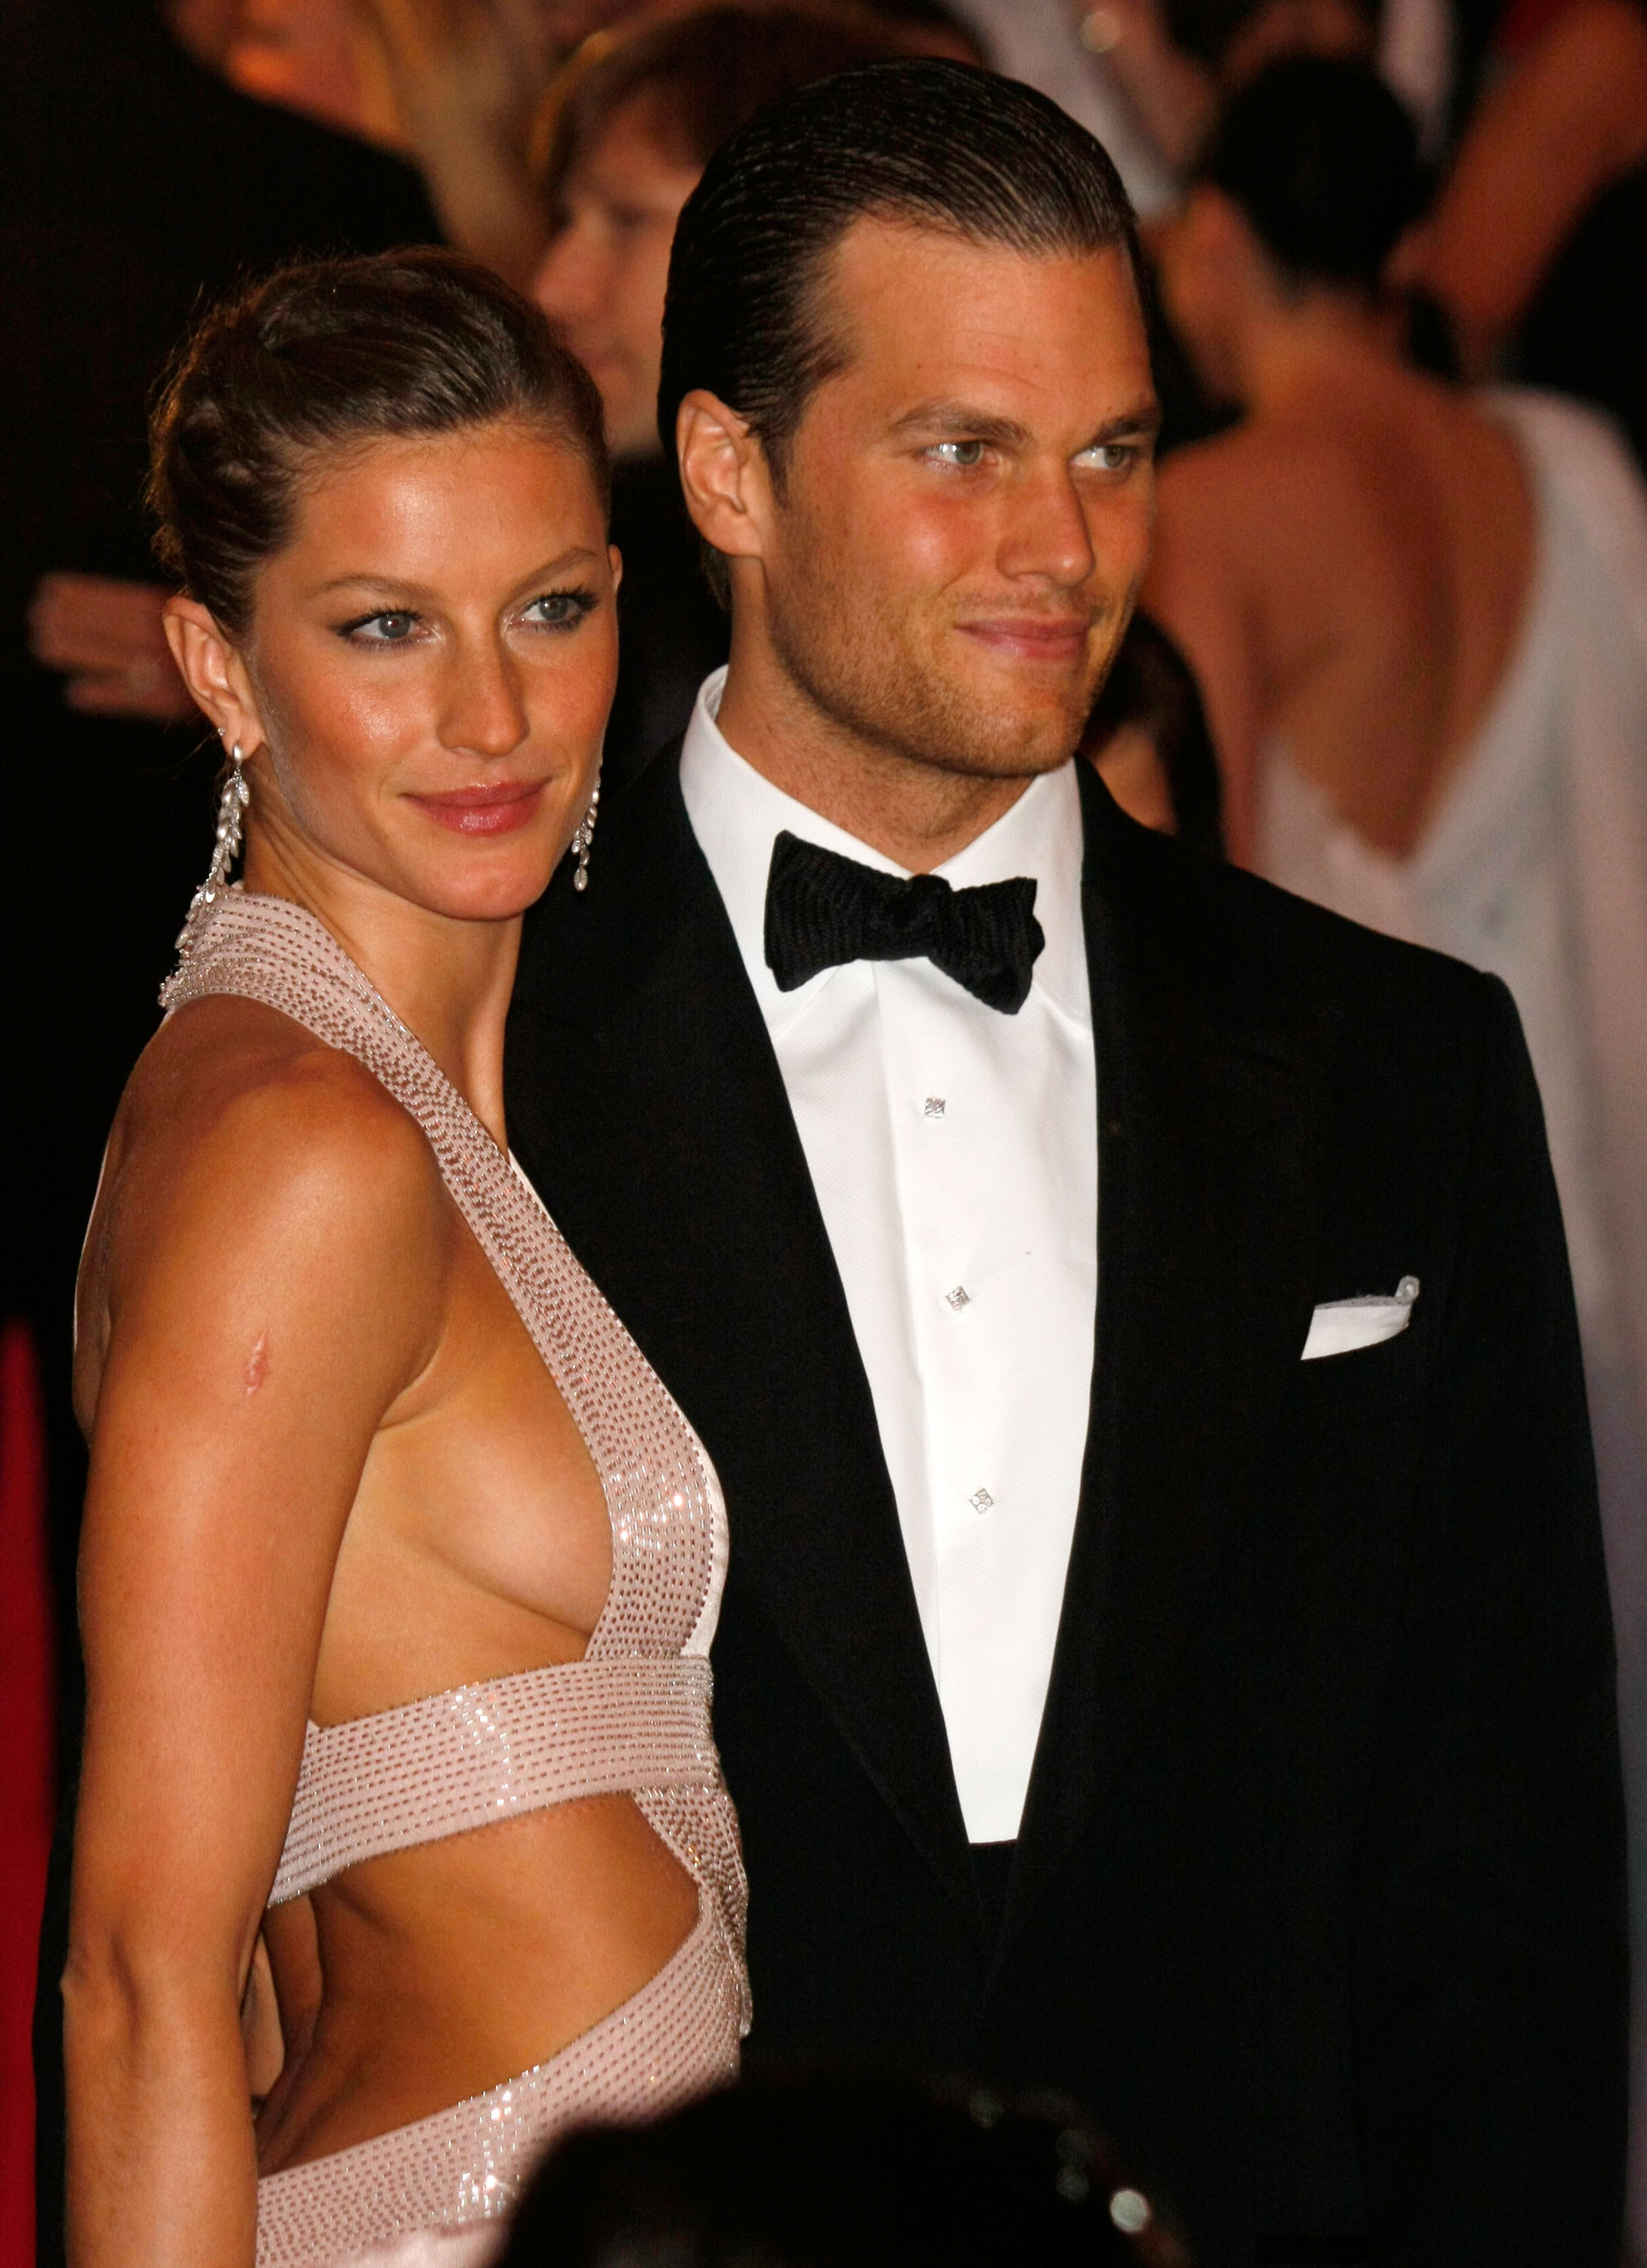 Gisele Bündchen and Tom Brady at the Metropolitan Museum of Art Costume Institute Gala in New York City on May 5, 2008 | Source: Getty Images